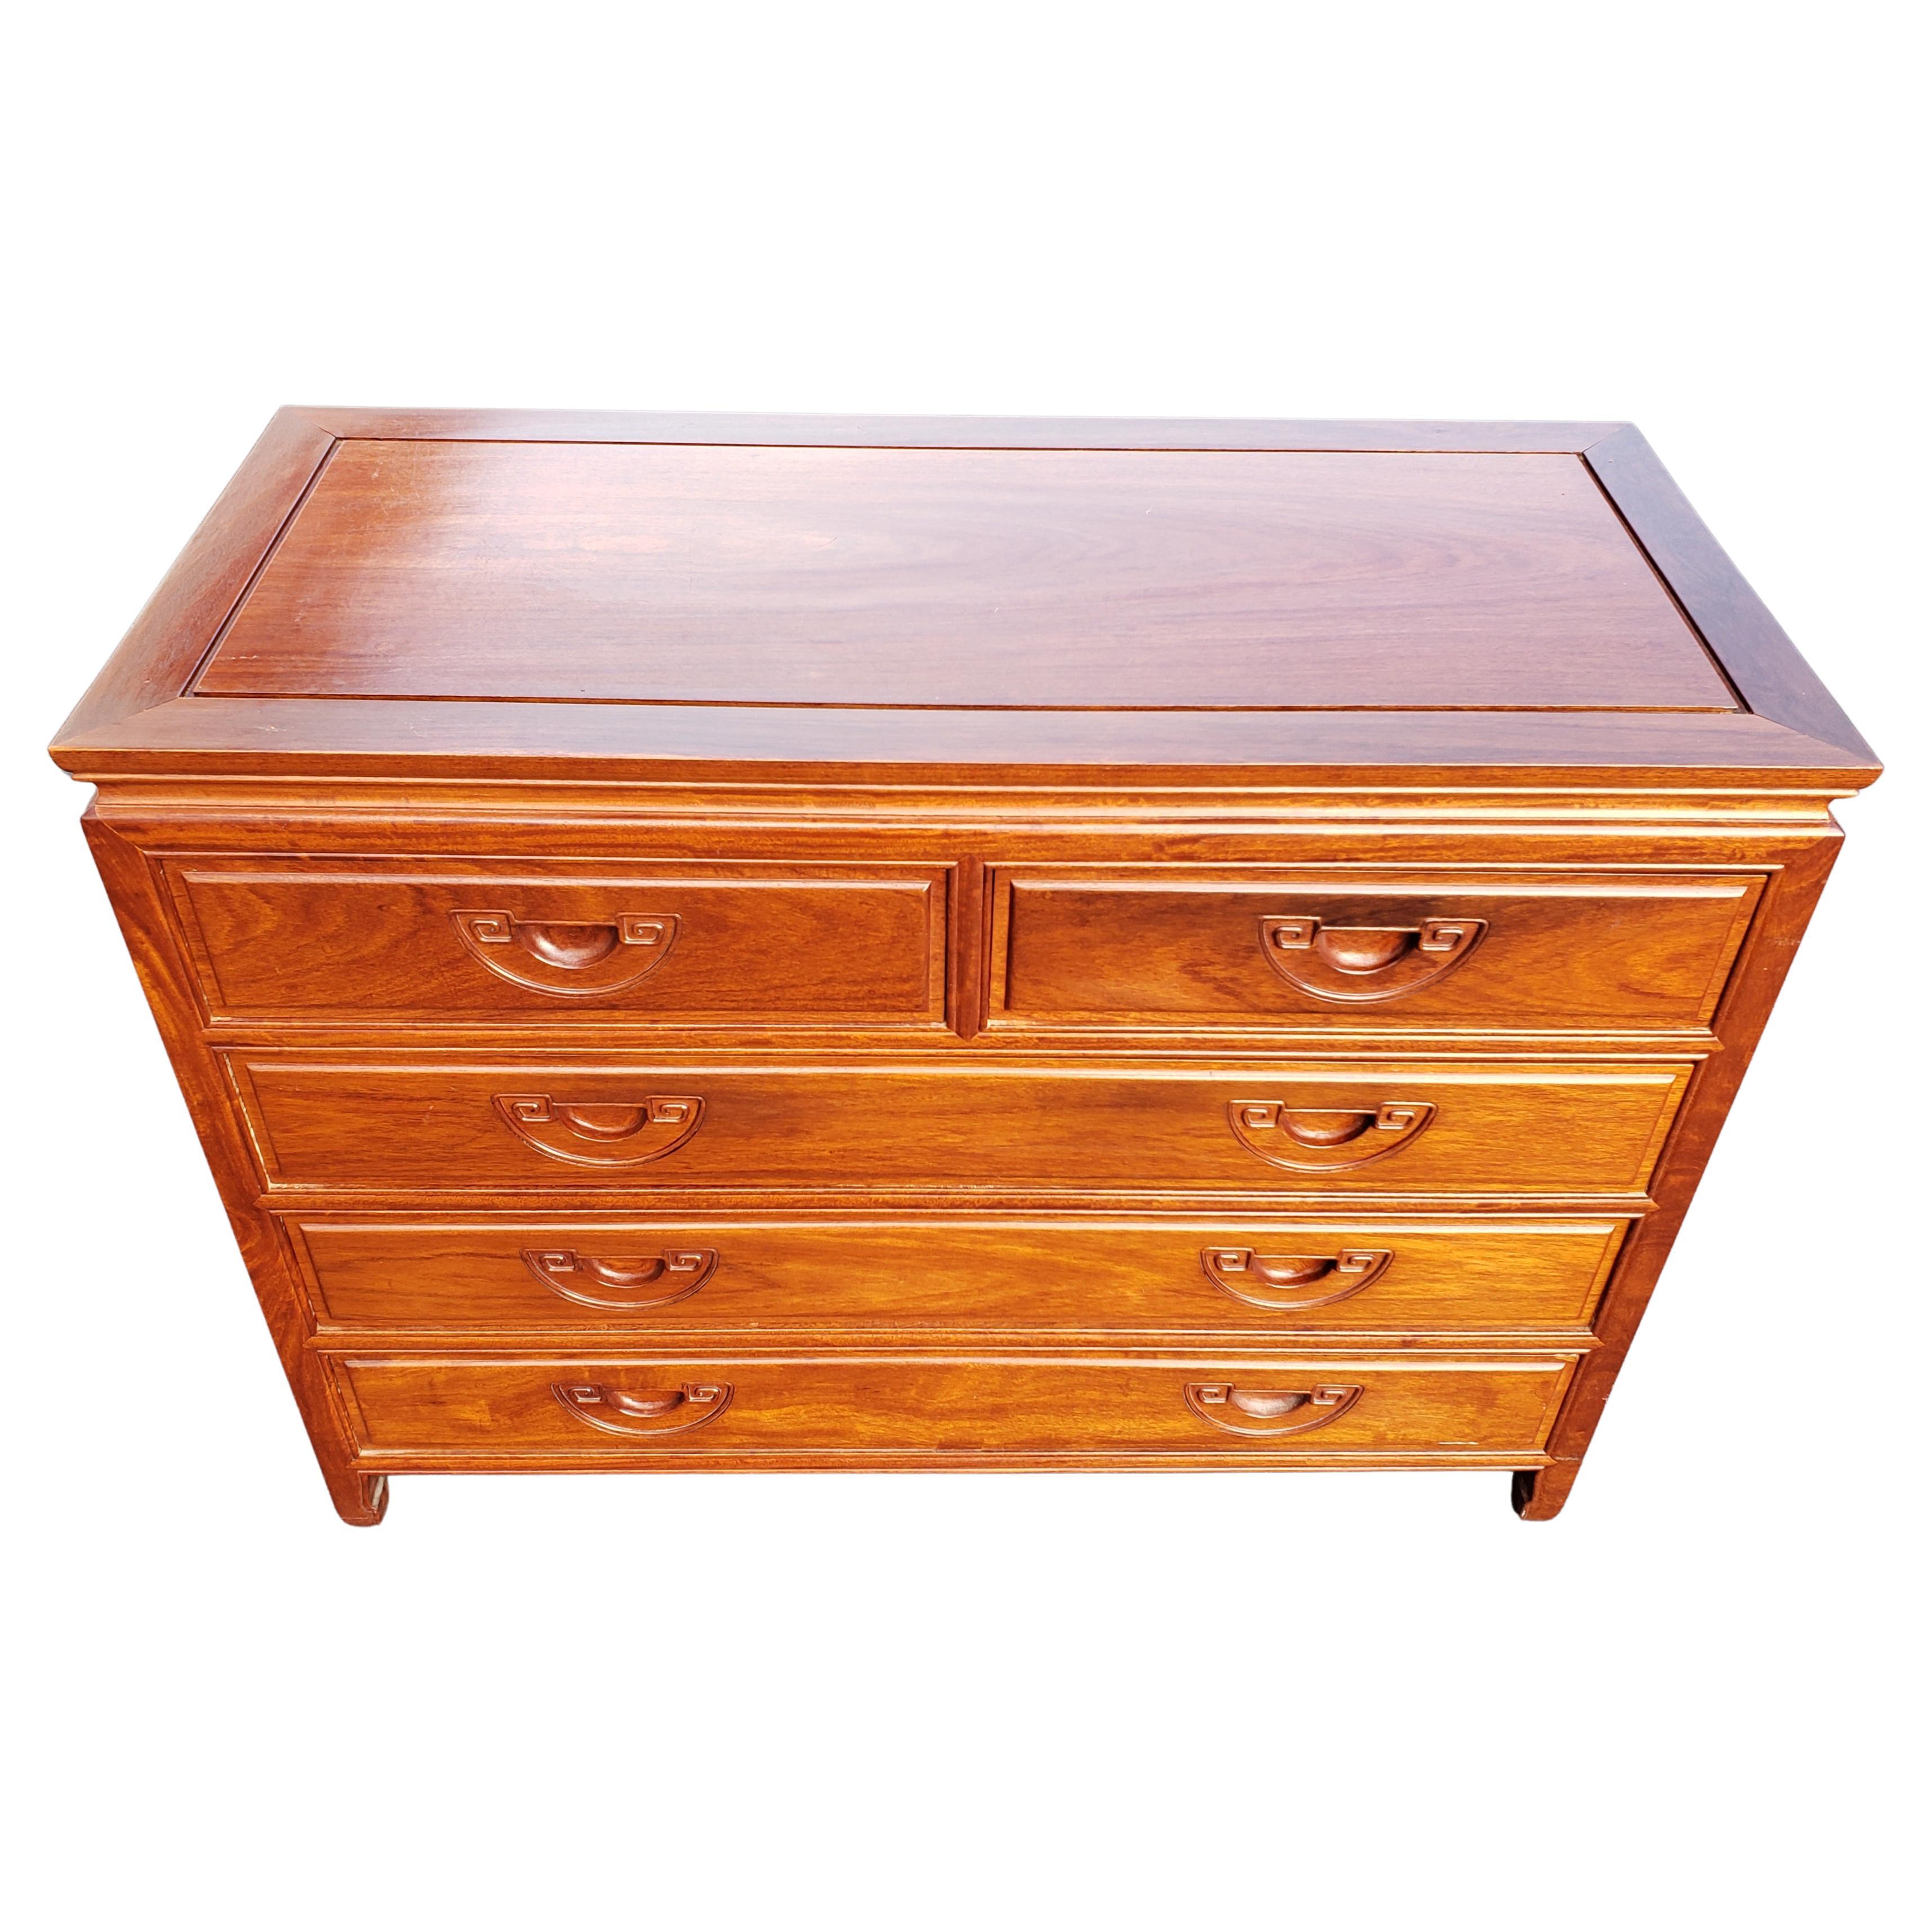 Tang George Zee Rosewood Hand Crafted Chest of Drawers and Side Tables, a Set